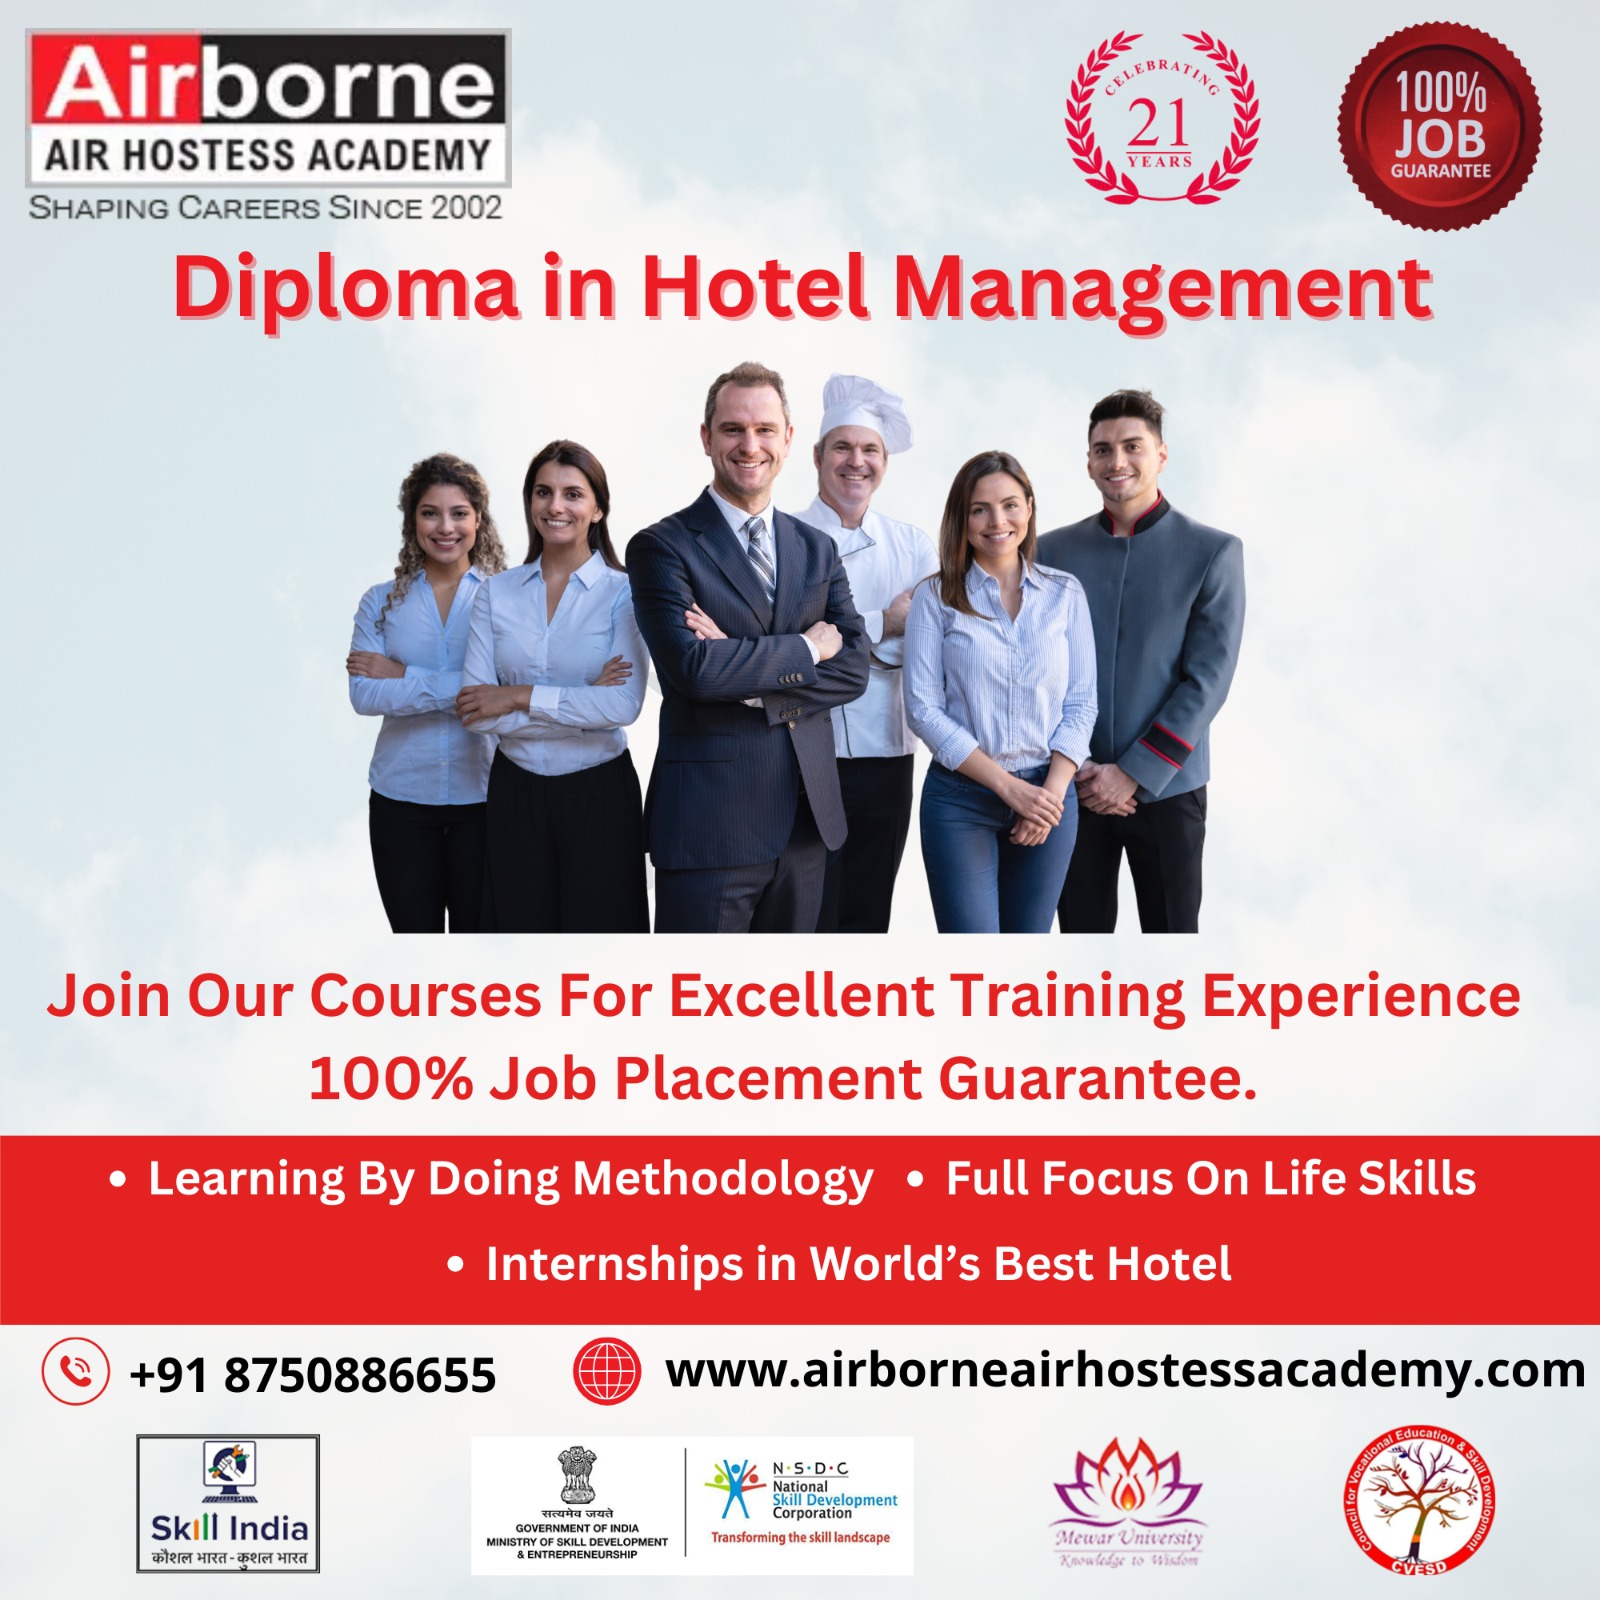 Top Hotel Management Diploma Course in Delhi